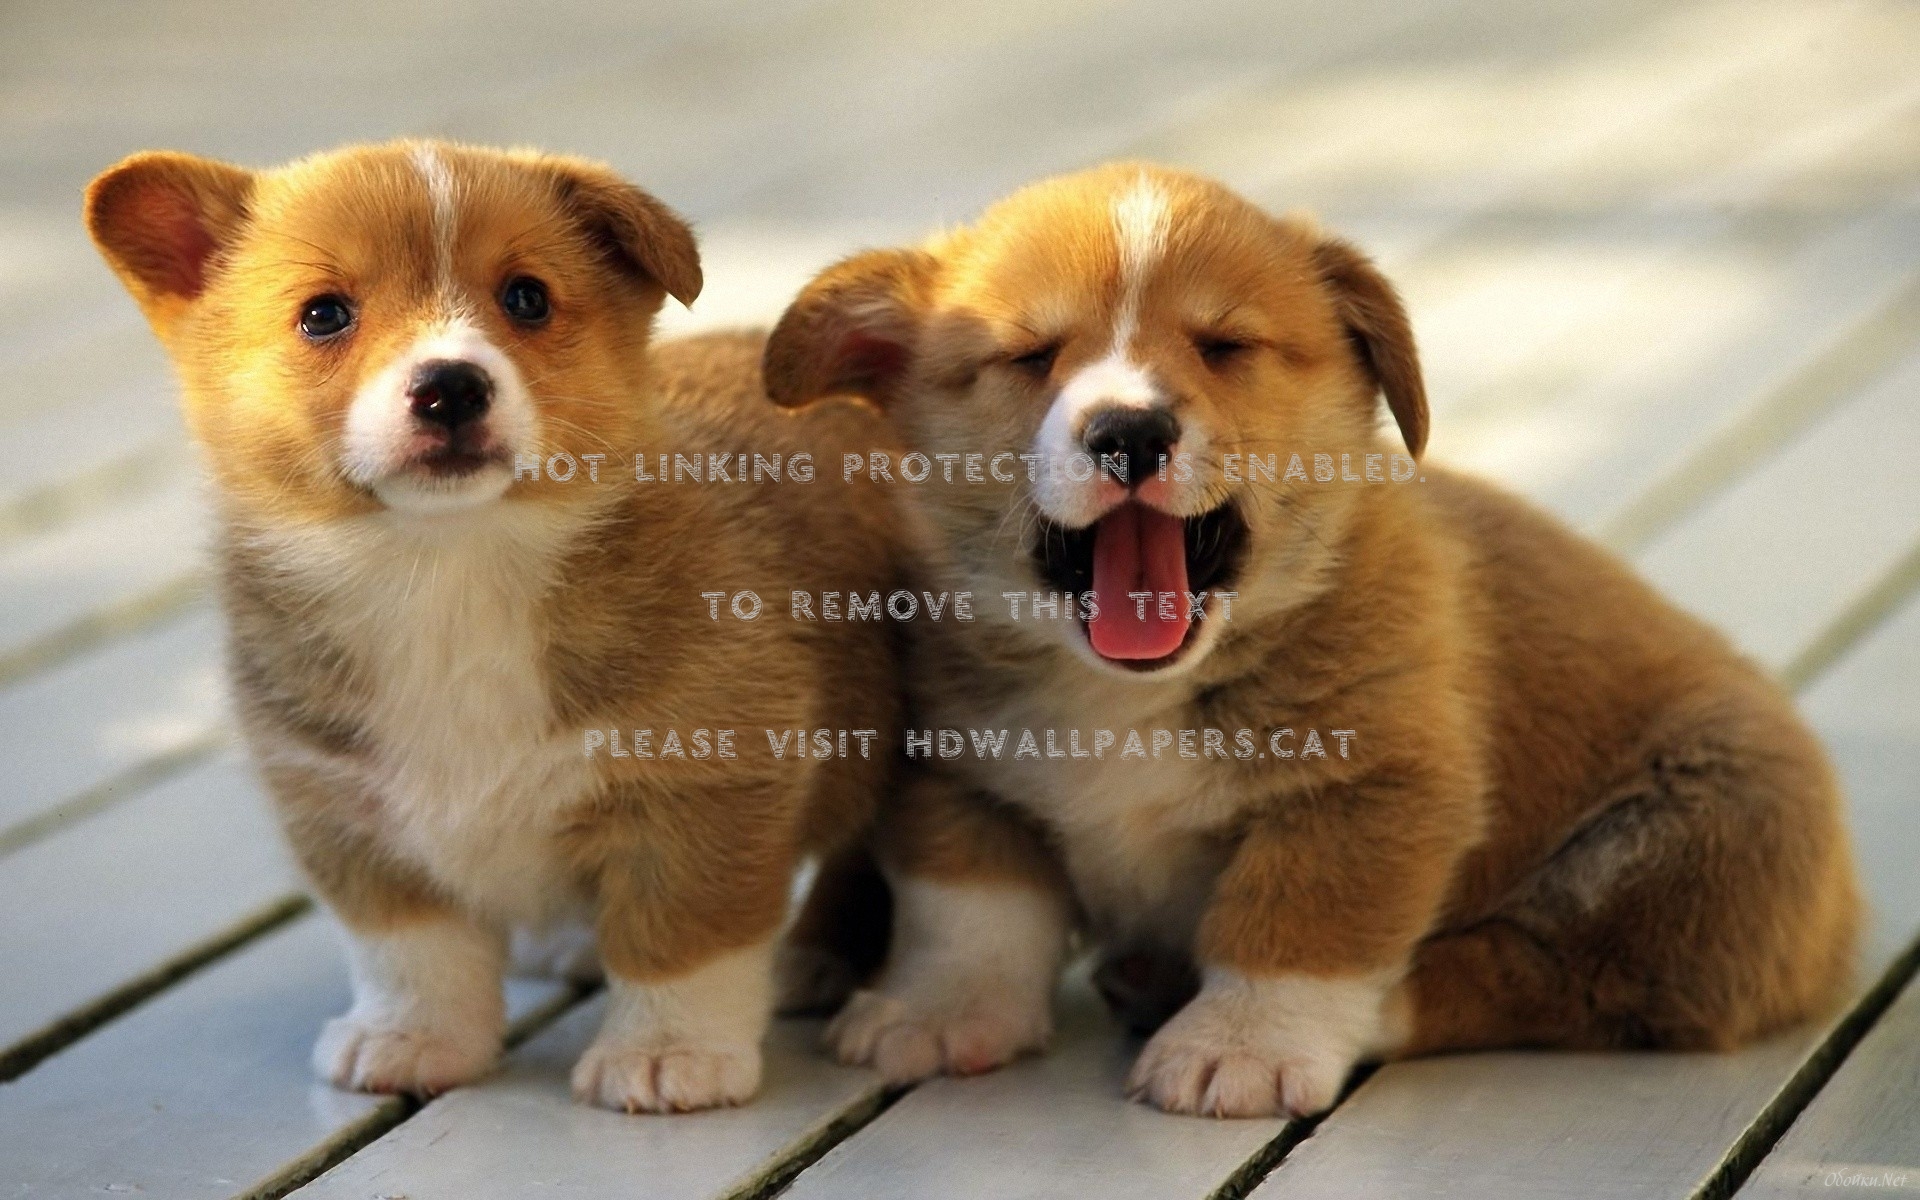 Puppy Dogs Nice Cute Puppies Animal - Dogs Animals - HD Wallpaper 